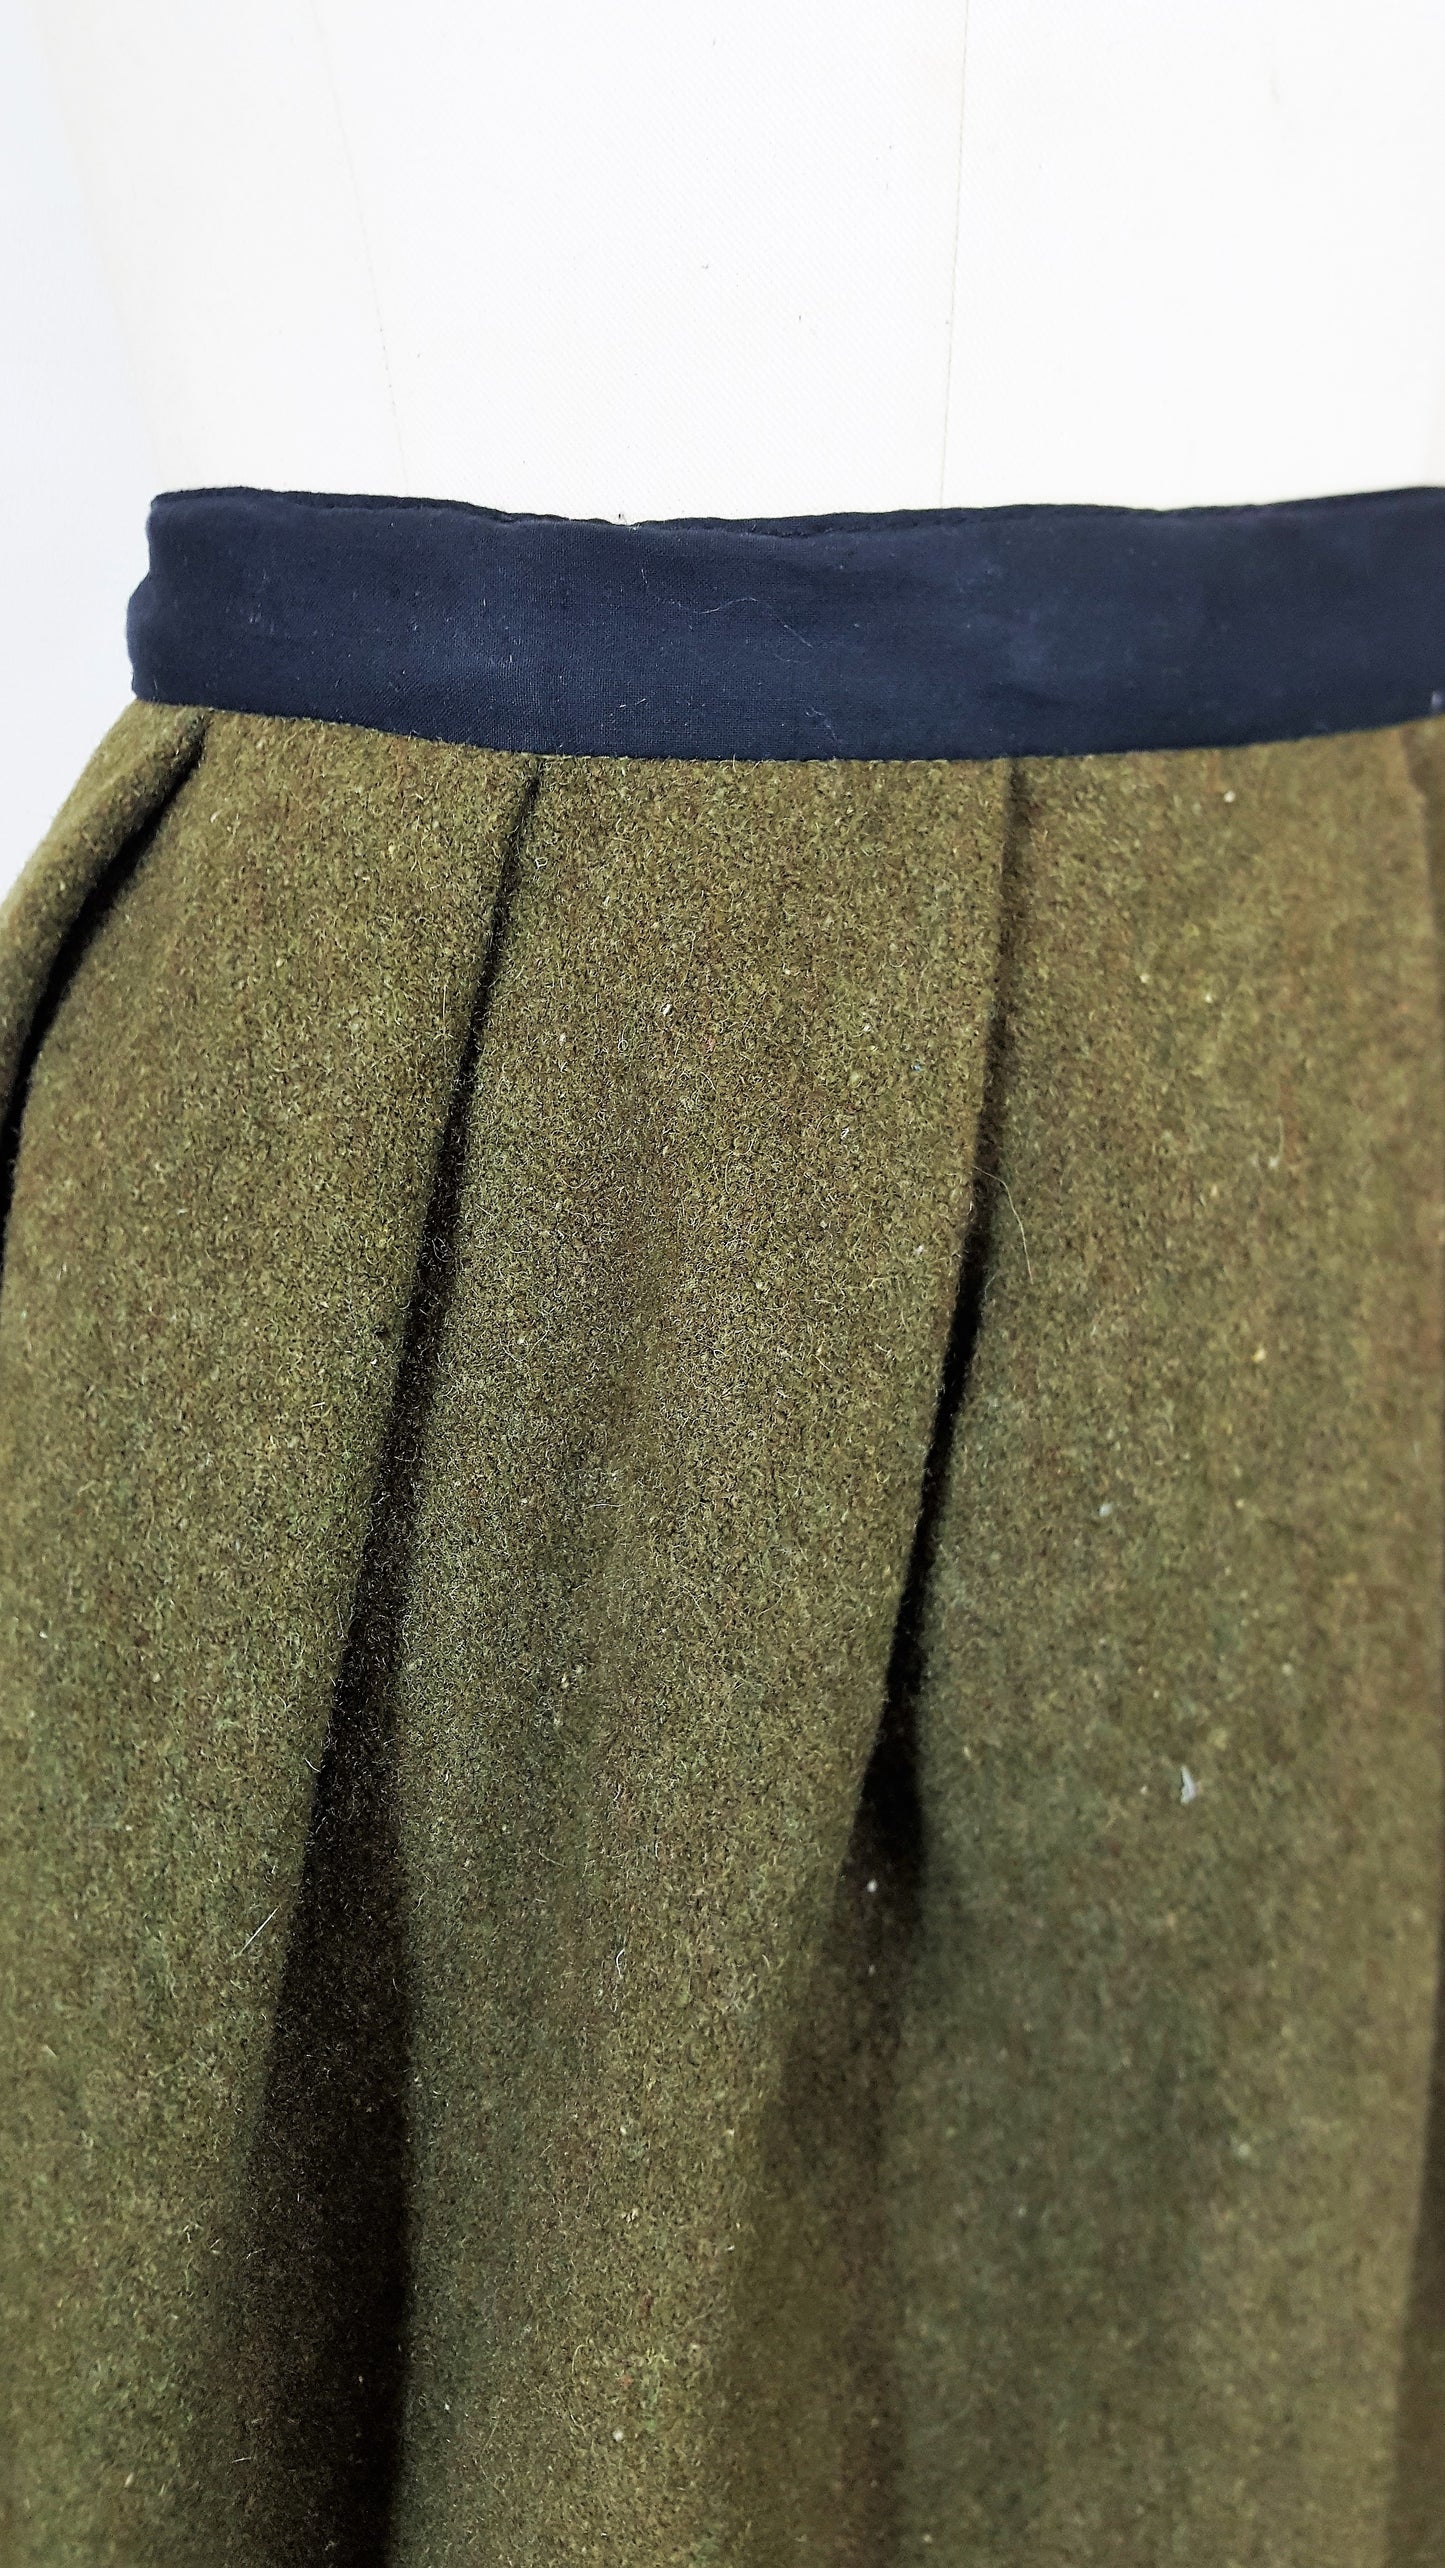 Vintage 1960s Green Wool Skirt With Pleats